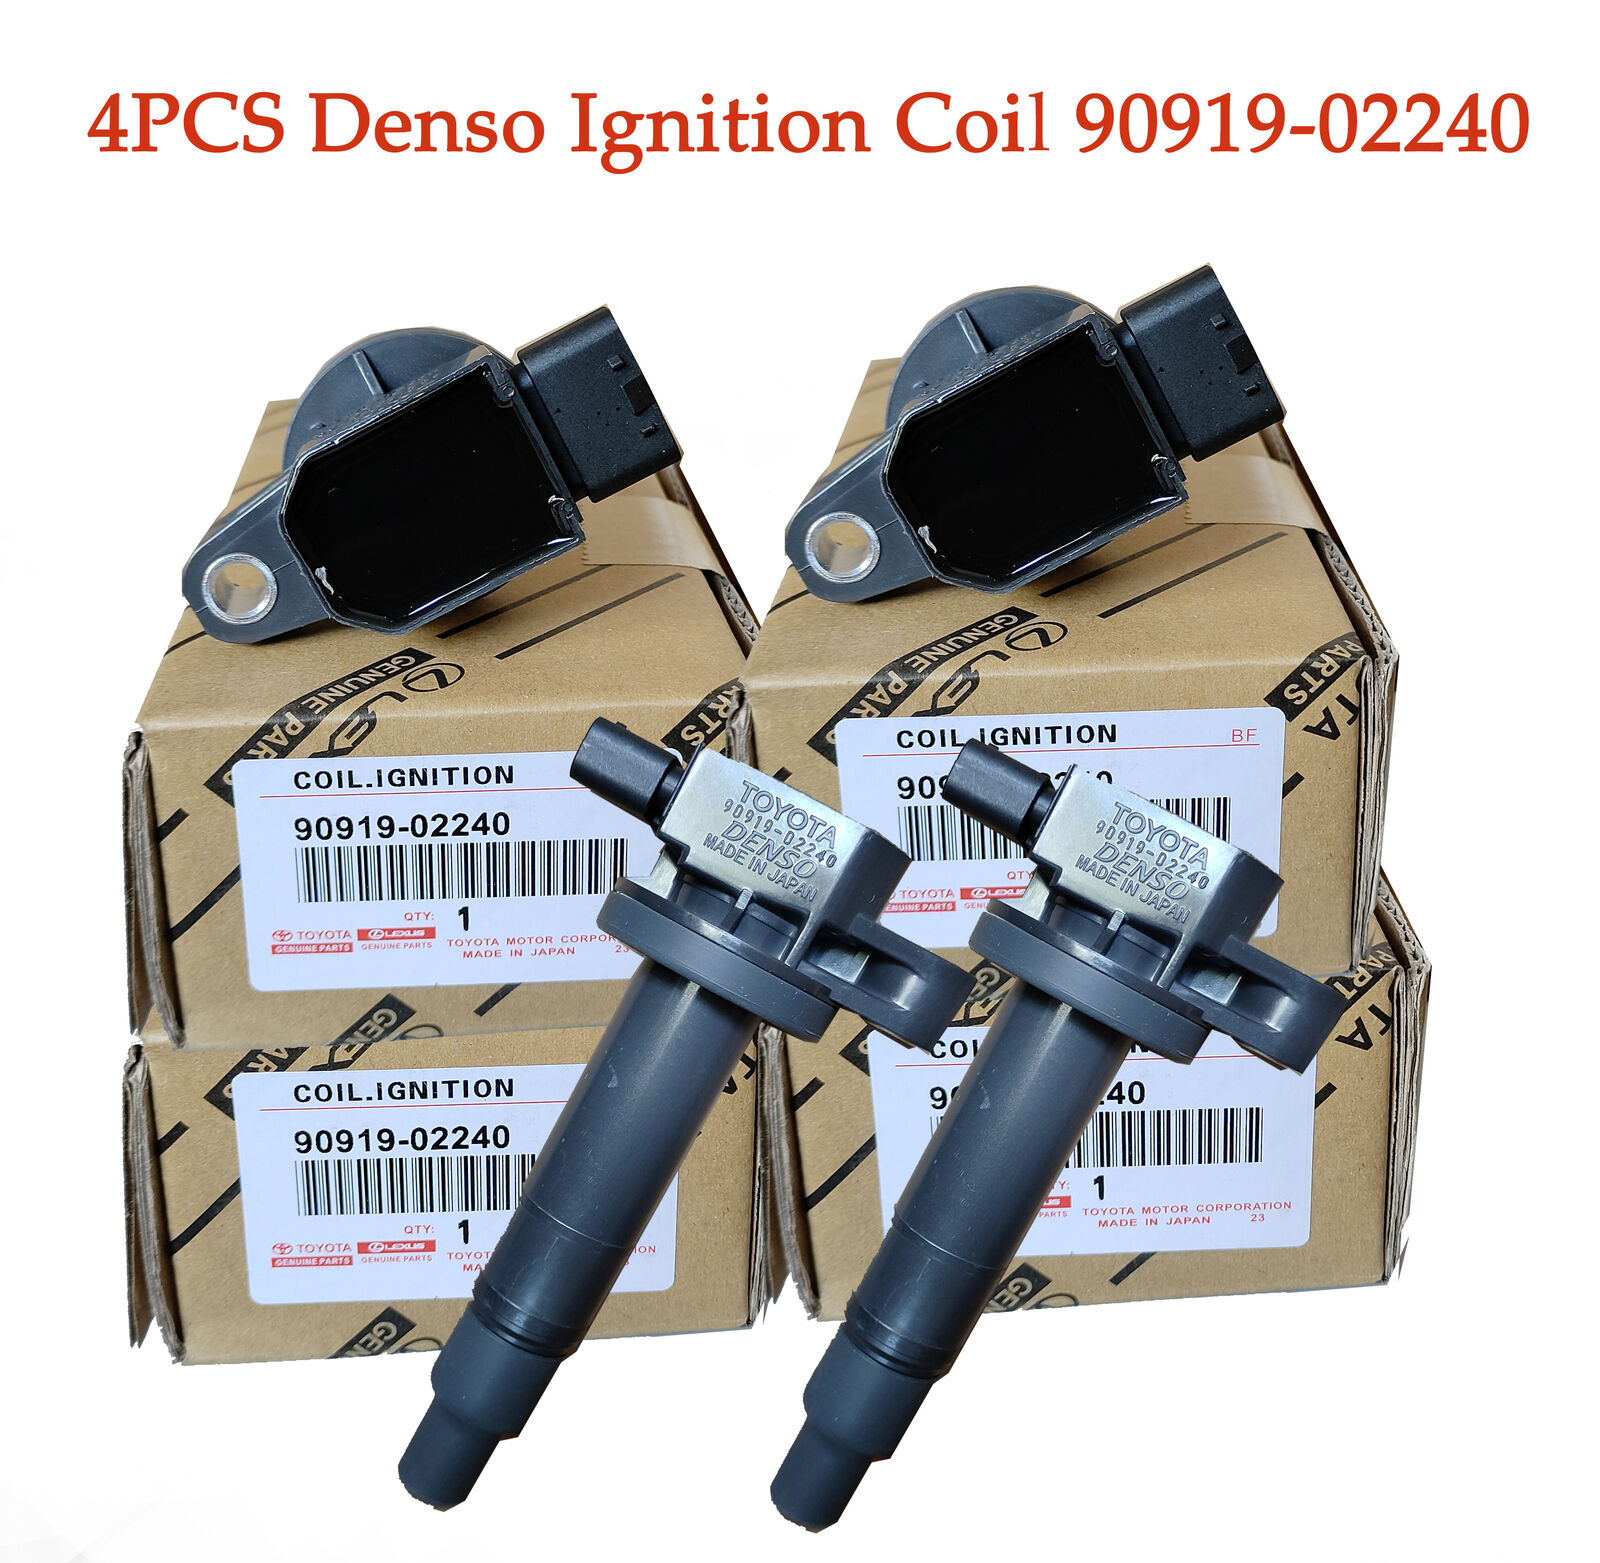 4PCS Ignition Coils 90919-02240 Denso 673-1306 For Toyota Corolla Yaris Prius